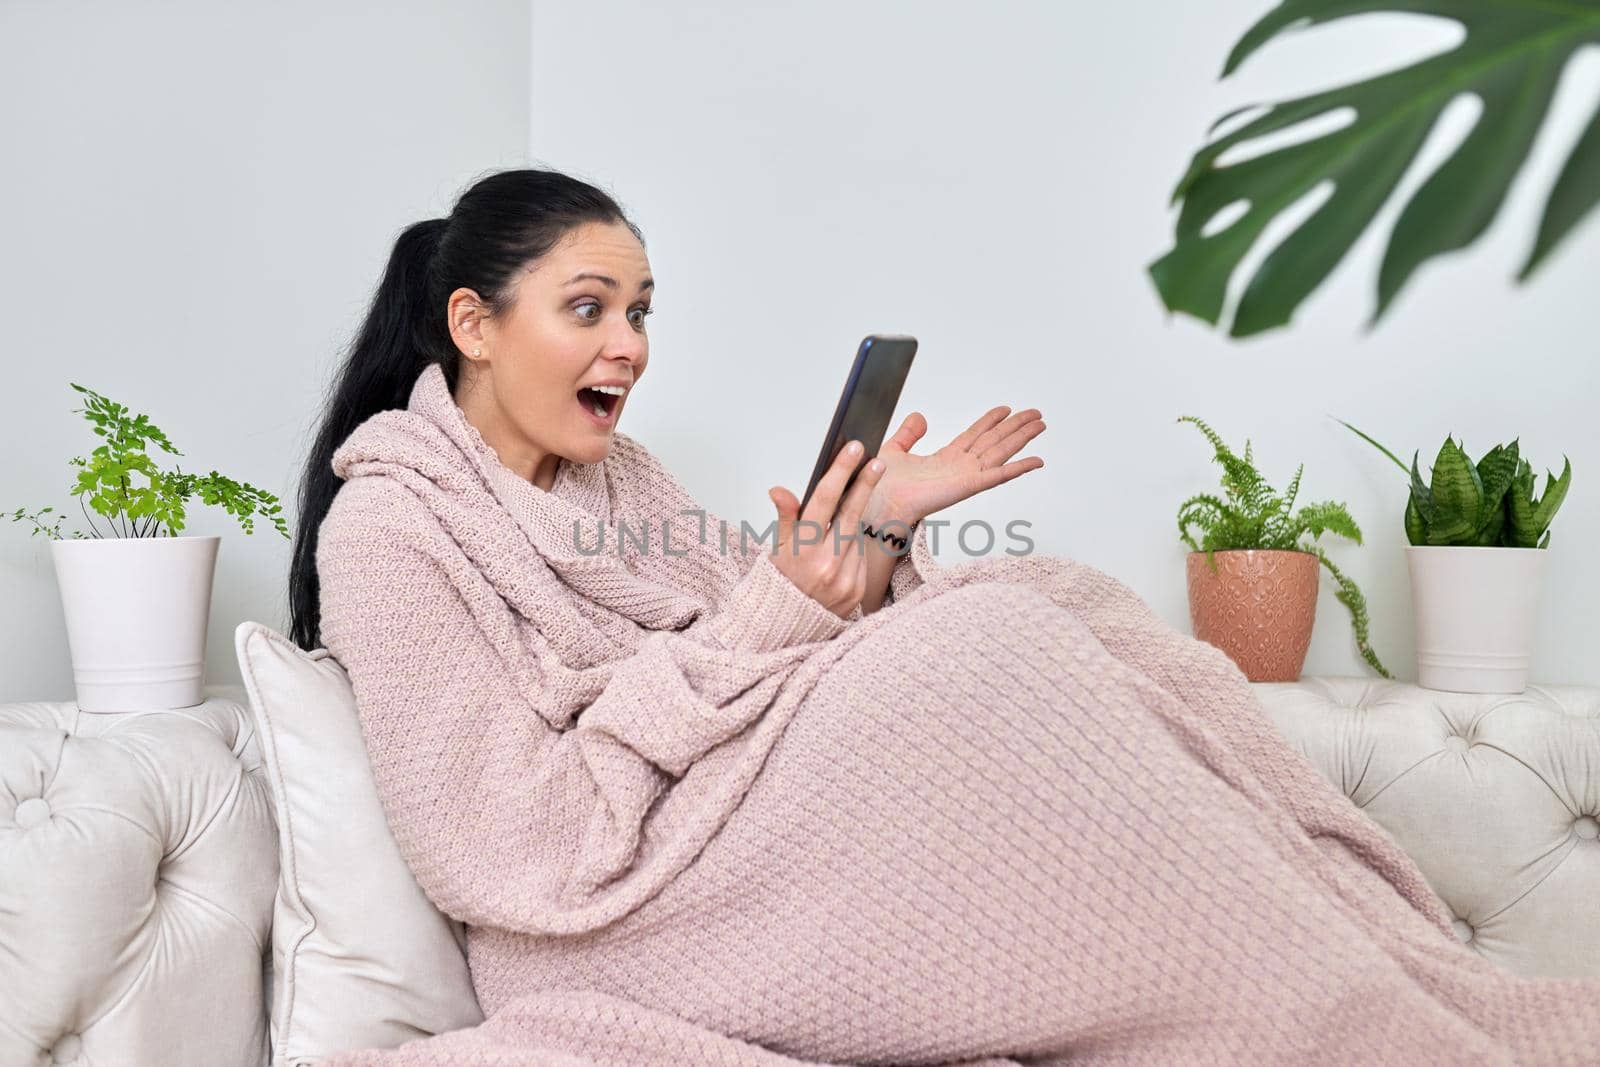 Surprised emotional middle-aged woman using smartphone for video call by VH-studio